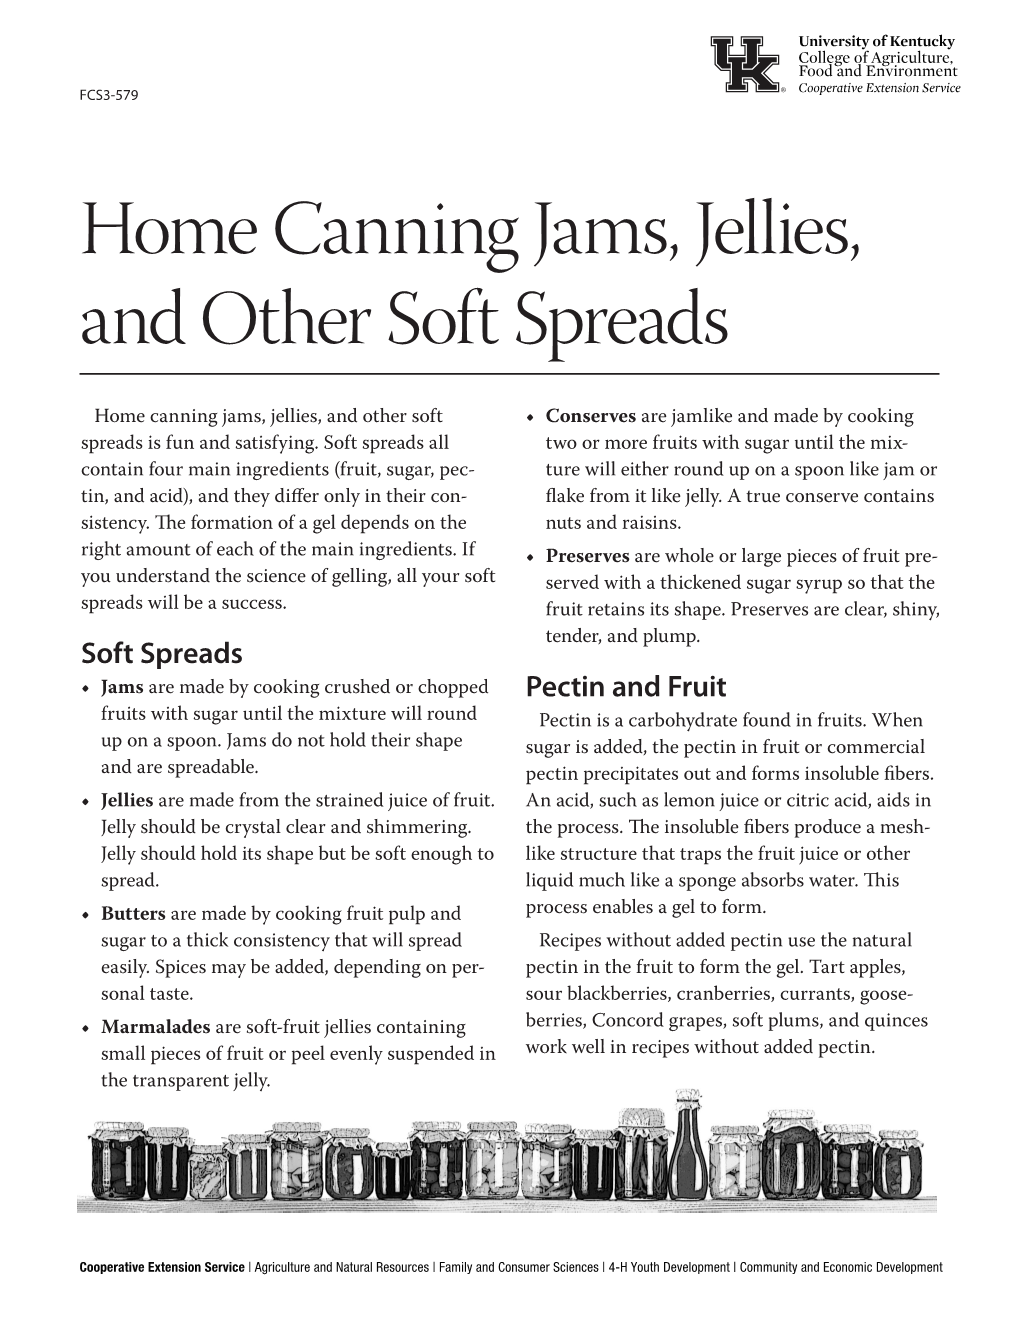 Home Canning Jams, Jellies, and Other Soft Spreads